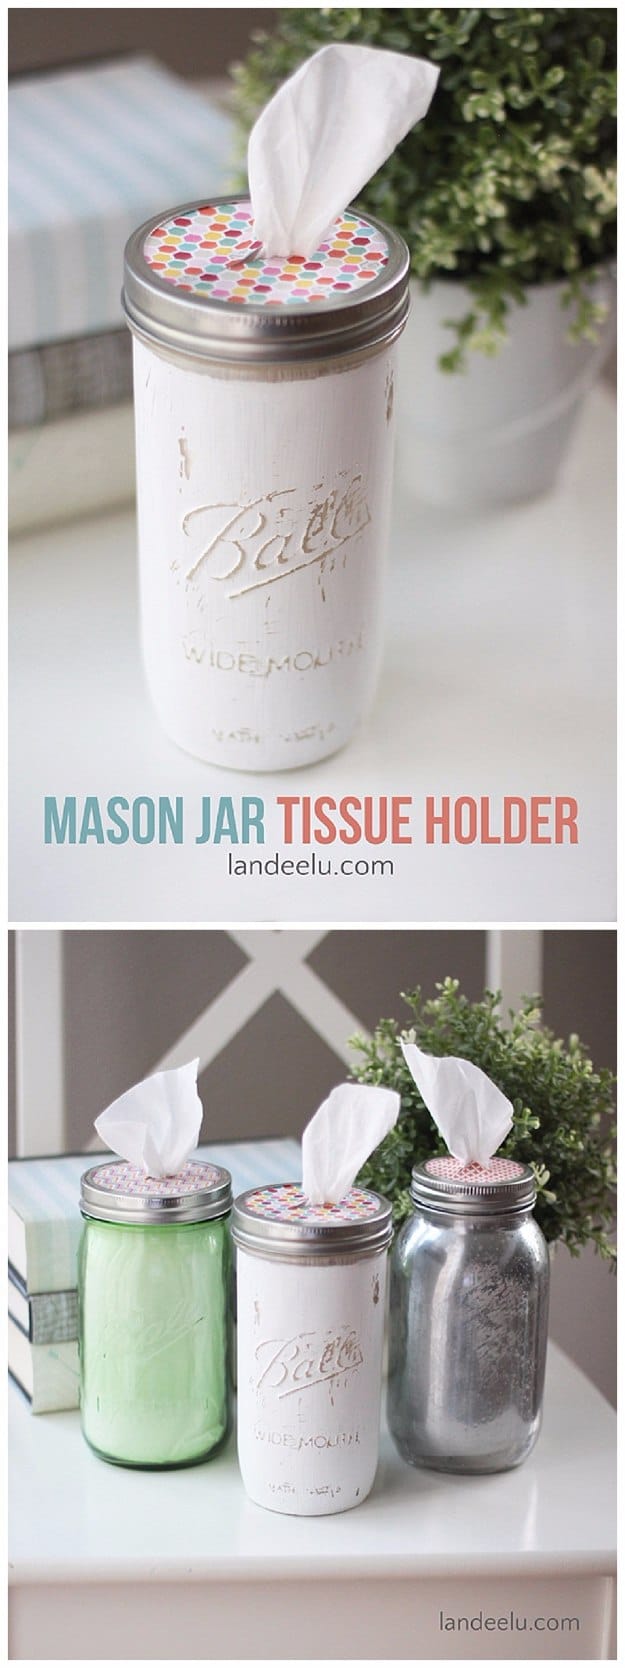 DIY Home Office Decor Ideas - Mason Jar Tissue Holder - Do It Yourself Desks, Tables, Wall Art, Chairs, Rugs, Seating and Desk Accessories for Your Home Office #office #diydecor #diy